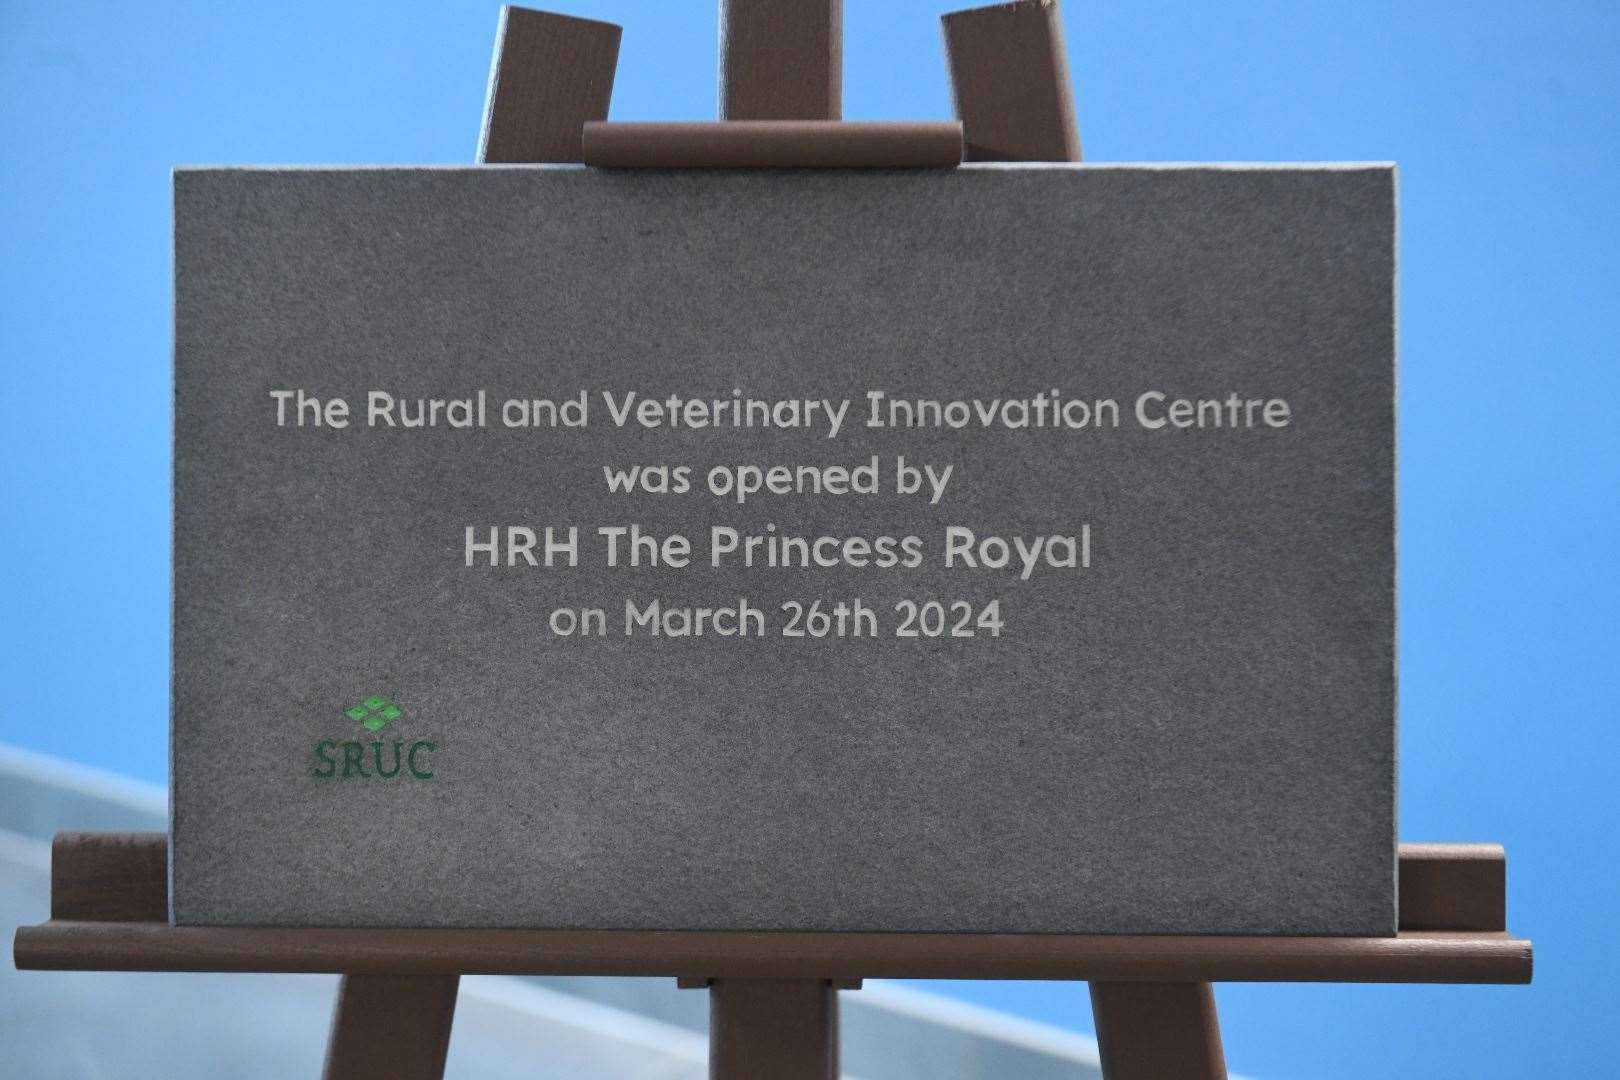 The Rural and Veterinary Innovation Centre was opened by HRH The Prices Royal on March 26, 2024.